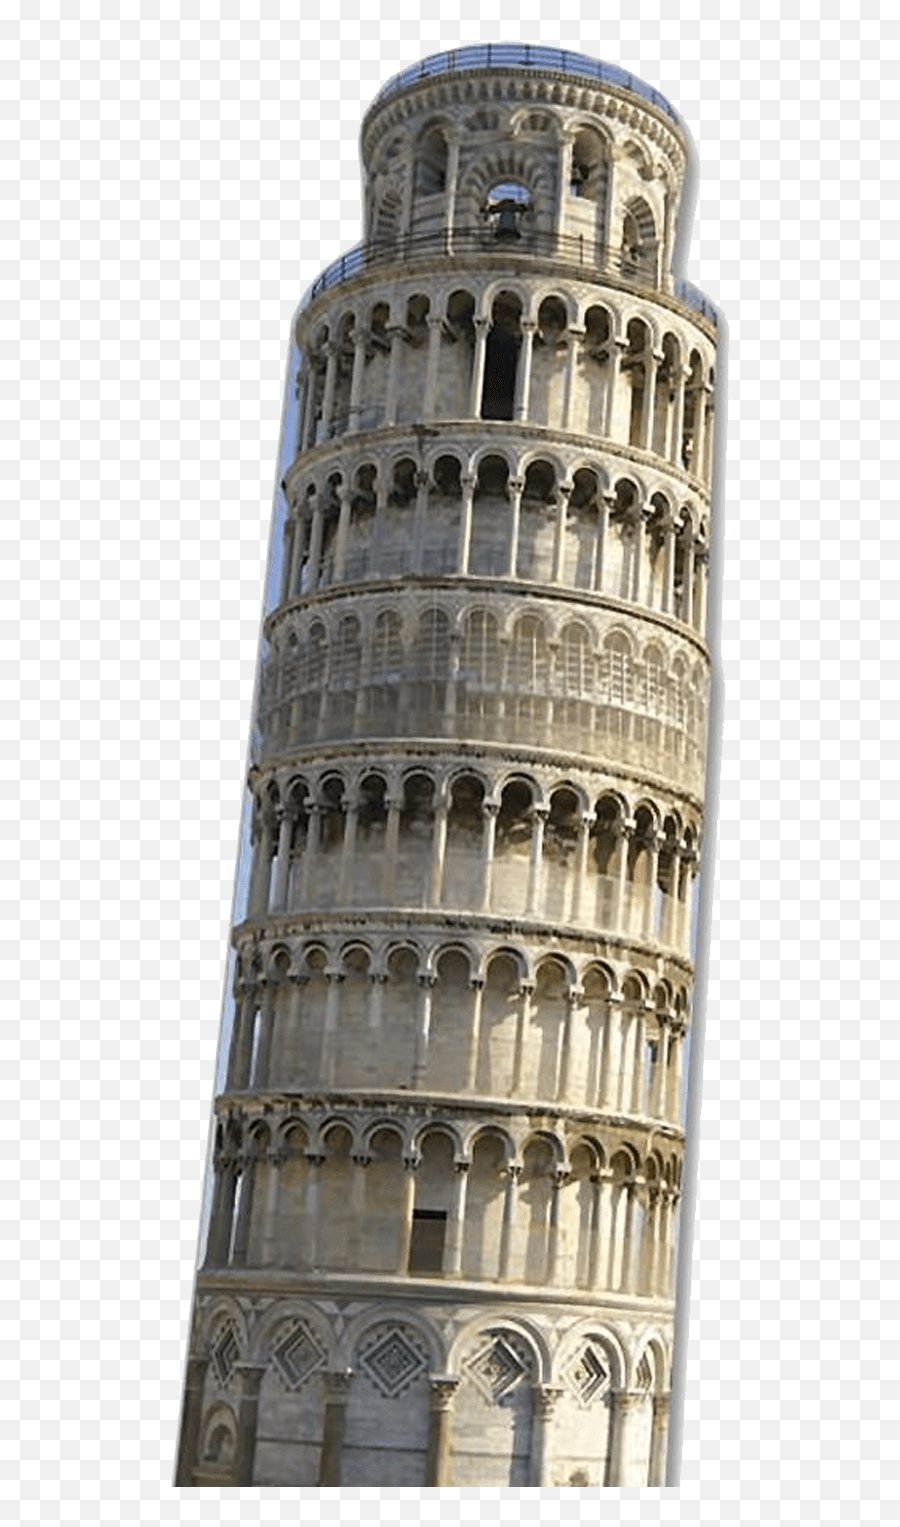 Png Transparent Pisa Tower - World Famous Place With Name,Tower Png